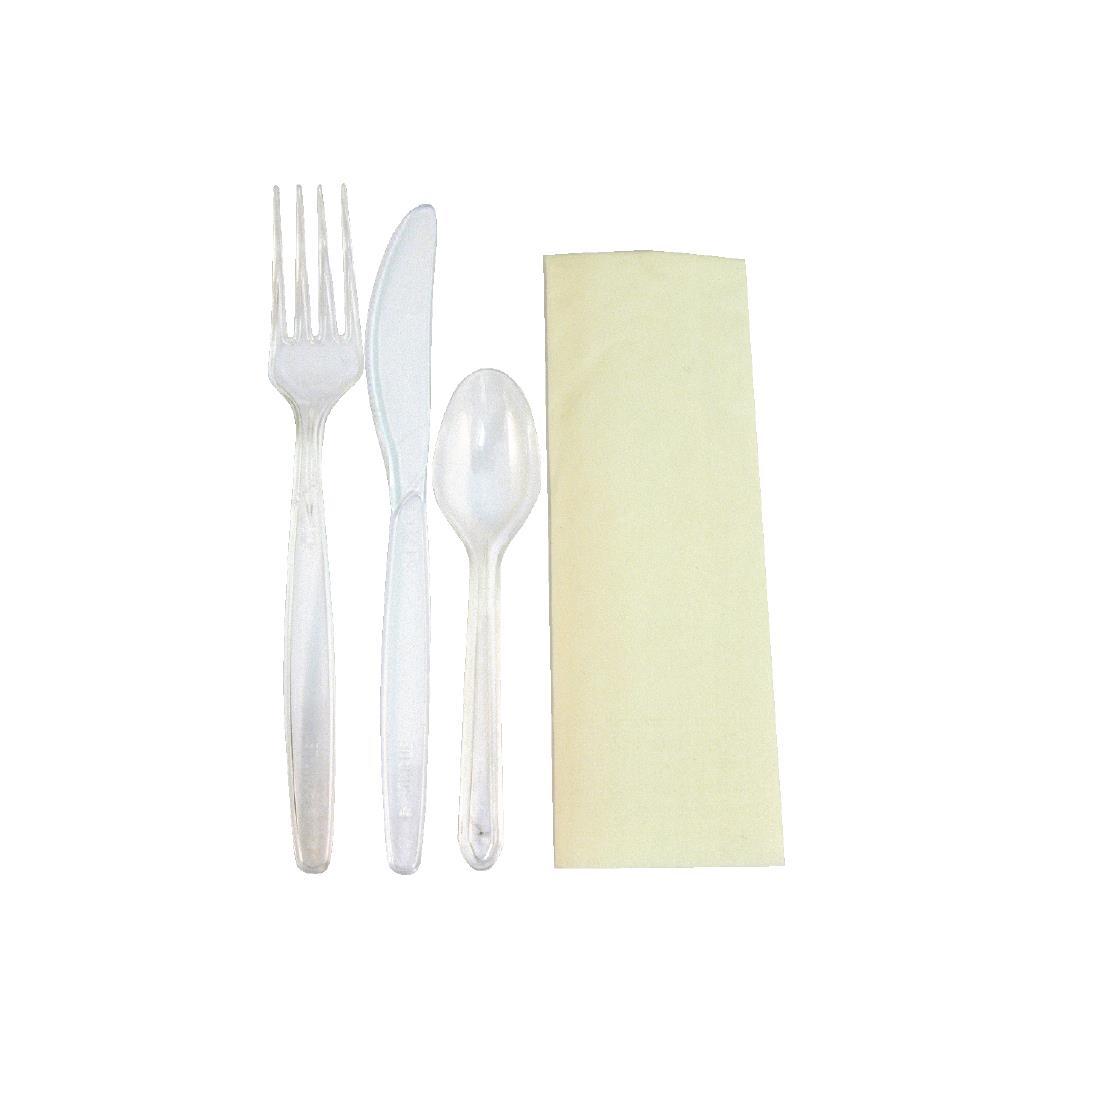 eGreen Deluxe Individually Wrapped Heavy-Duty Disposable Cutlery Sets (Pack of 250) - CB615  - 1